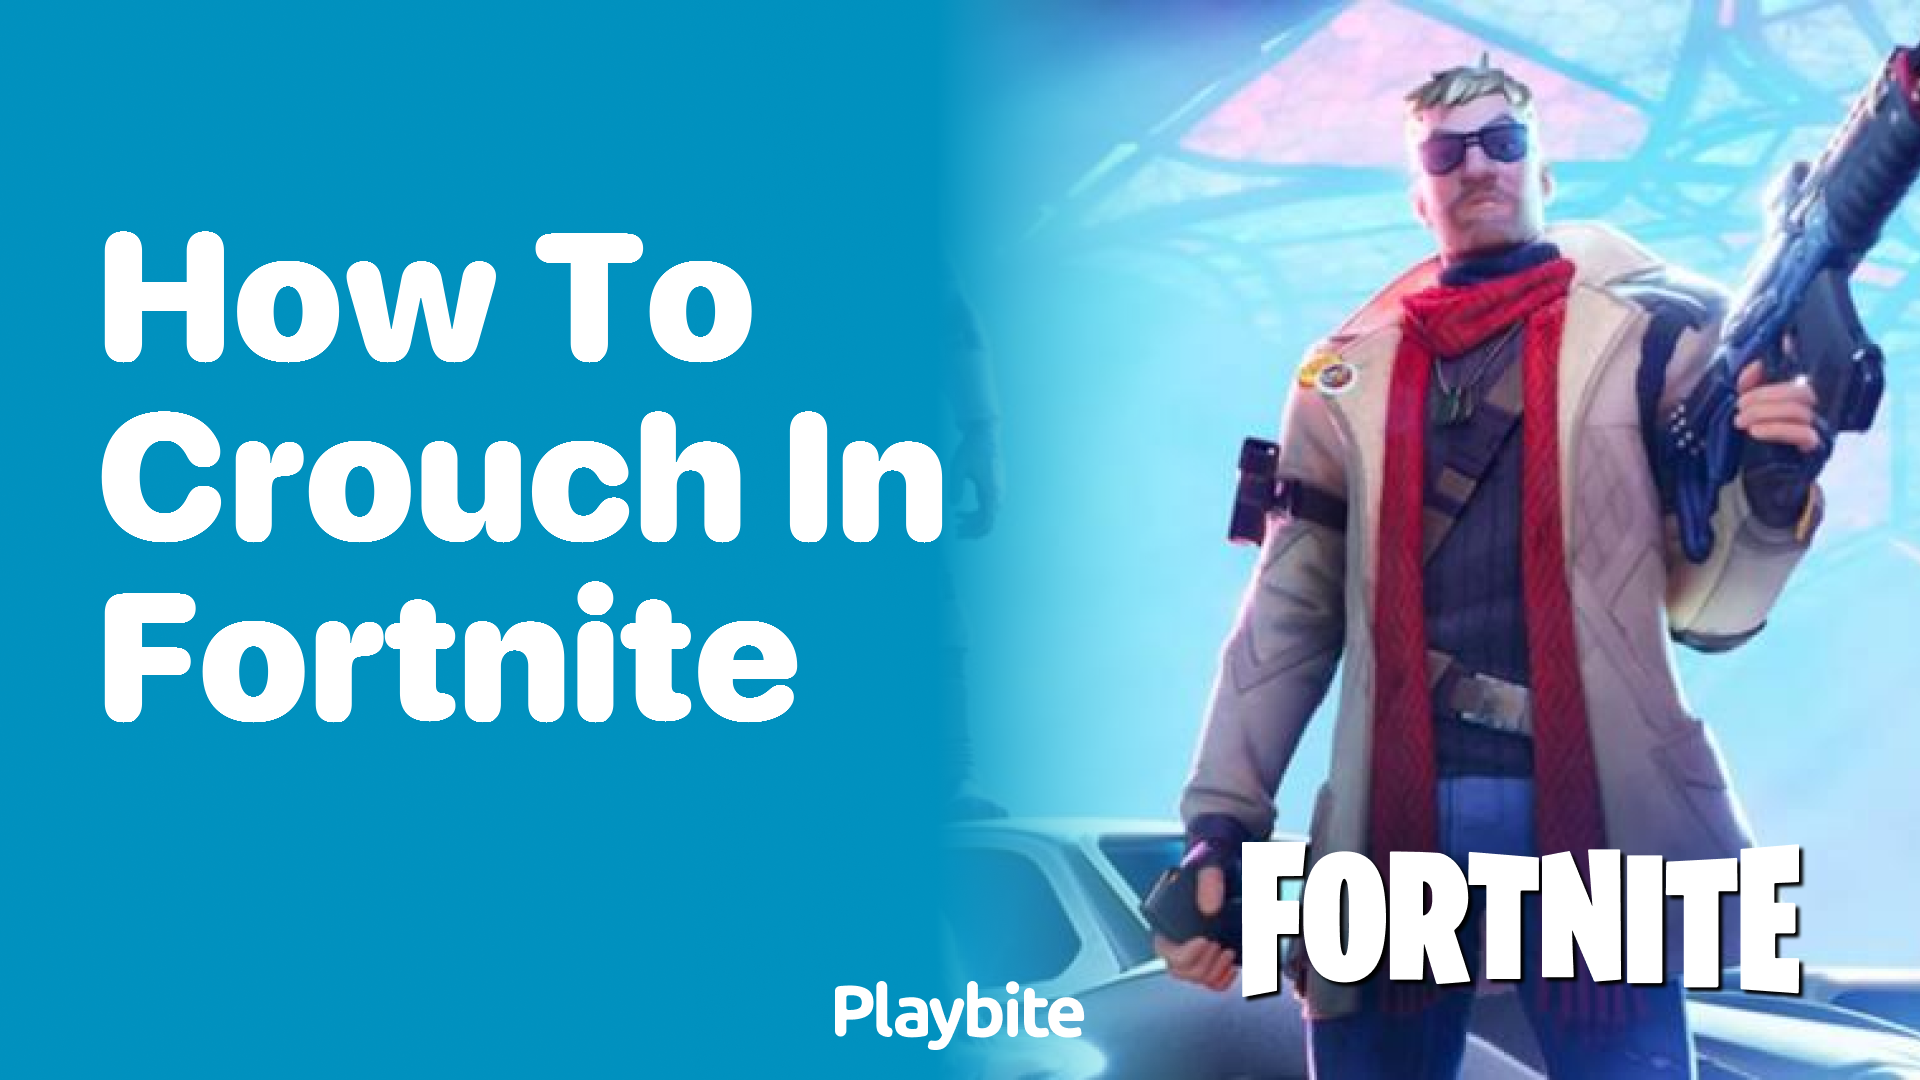 How to Crouch in Fortnite: A Quick Guide for Gamers